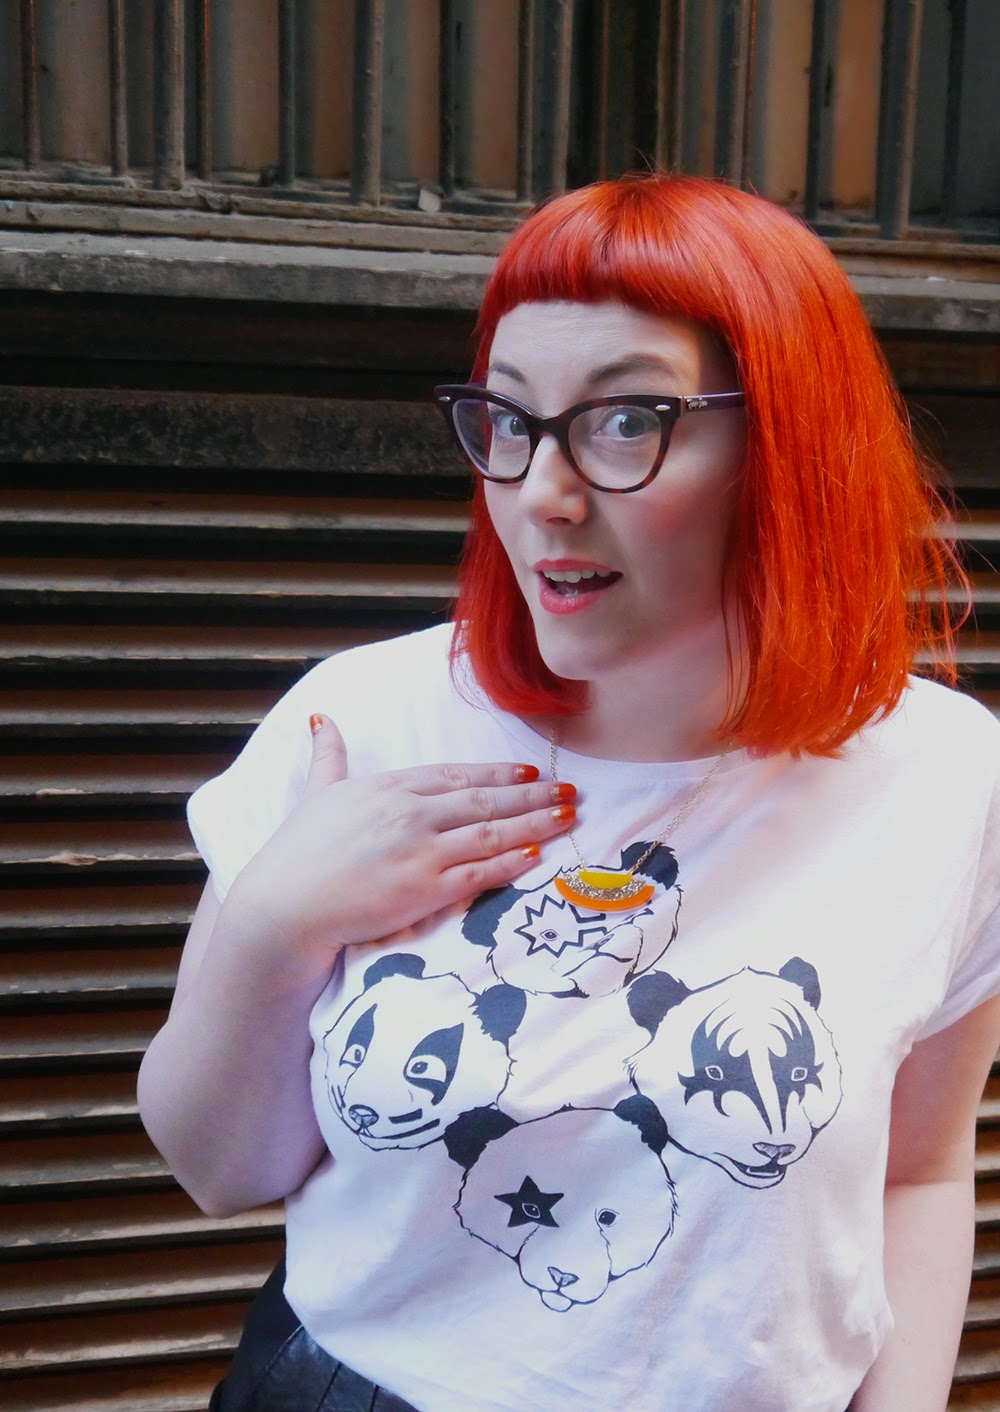 Scot Street Style, Glasgow street style, Scottish Blogger, Edinburgh Blogger, red head style, Brat and Suzie Panda Tshirt, Vintage leather skirt, Duo leopard boots, Sugar and Vice necklace, Glasgow